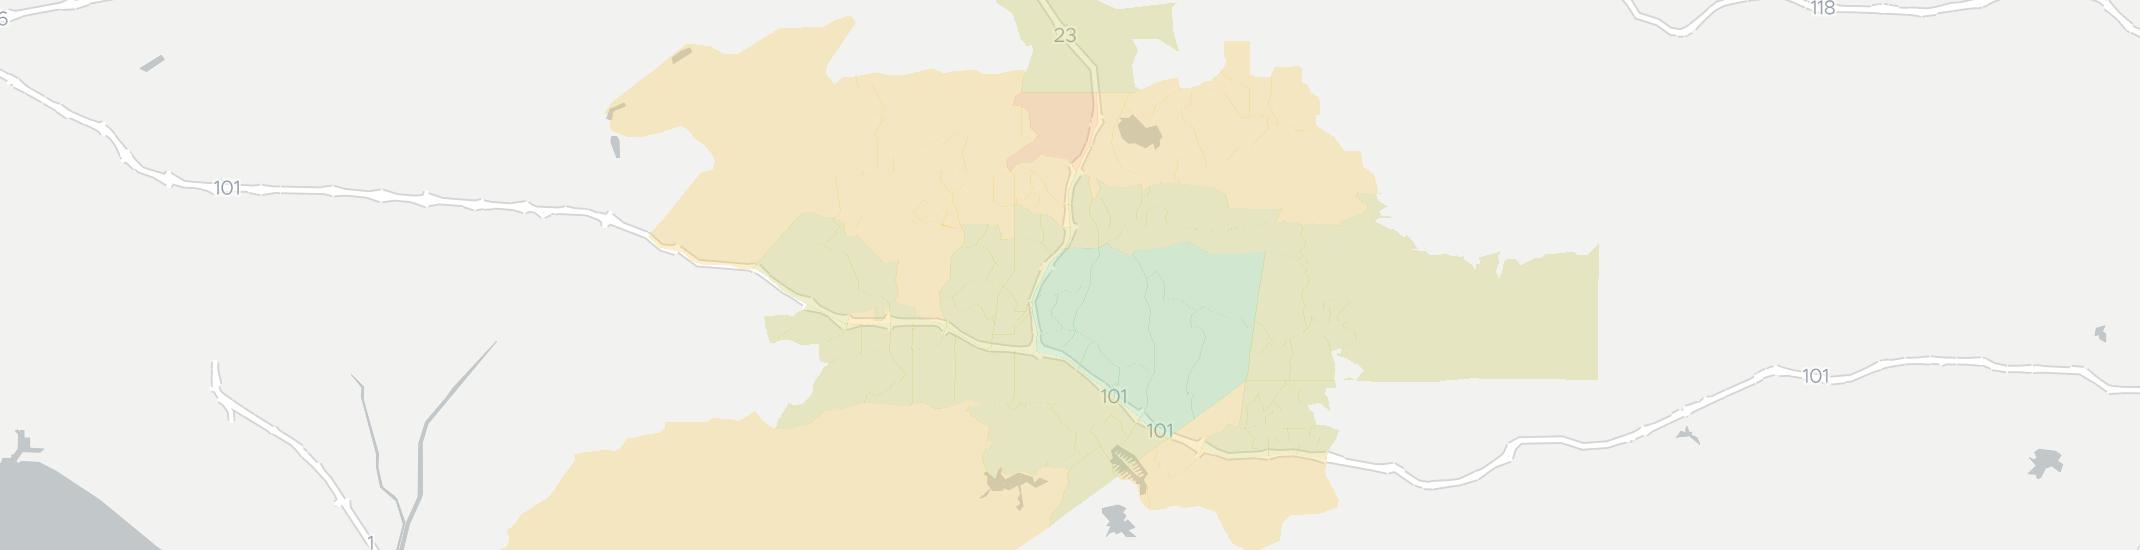 Thousand Oaks Internet Competition Map. Click for interactive map.